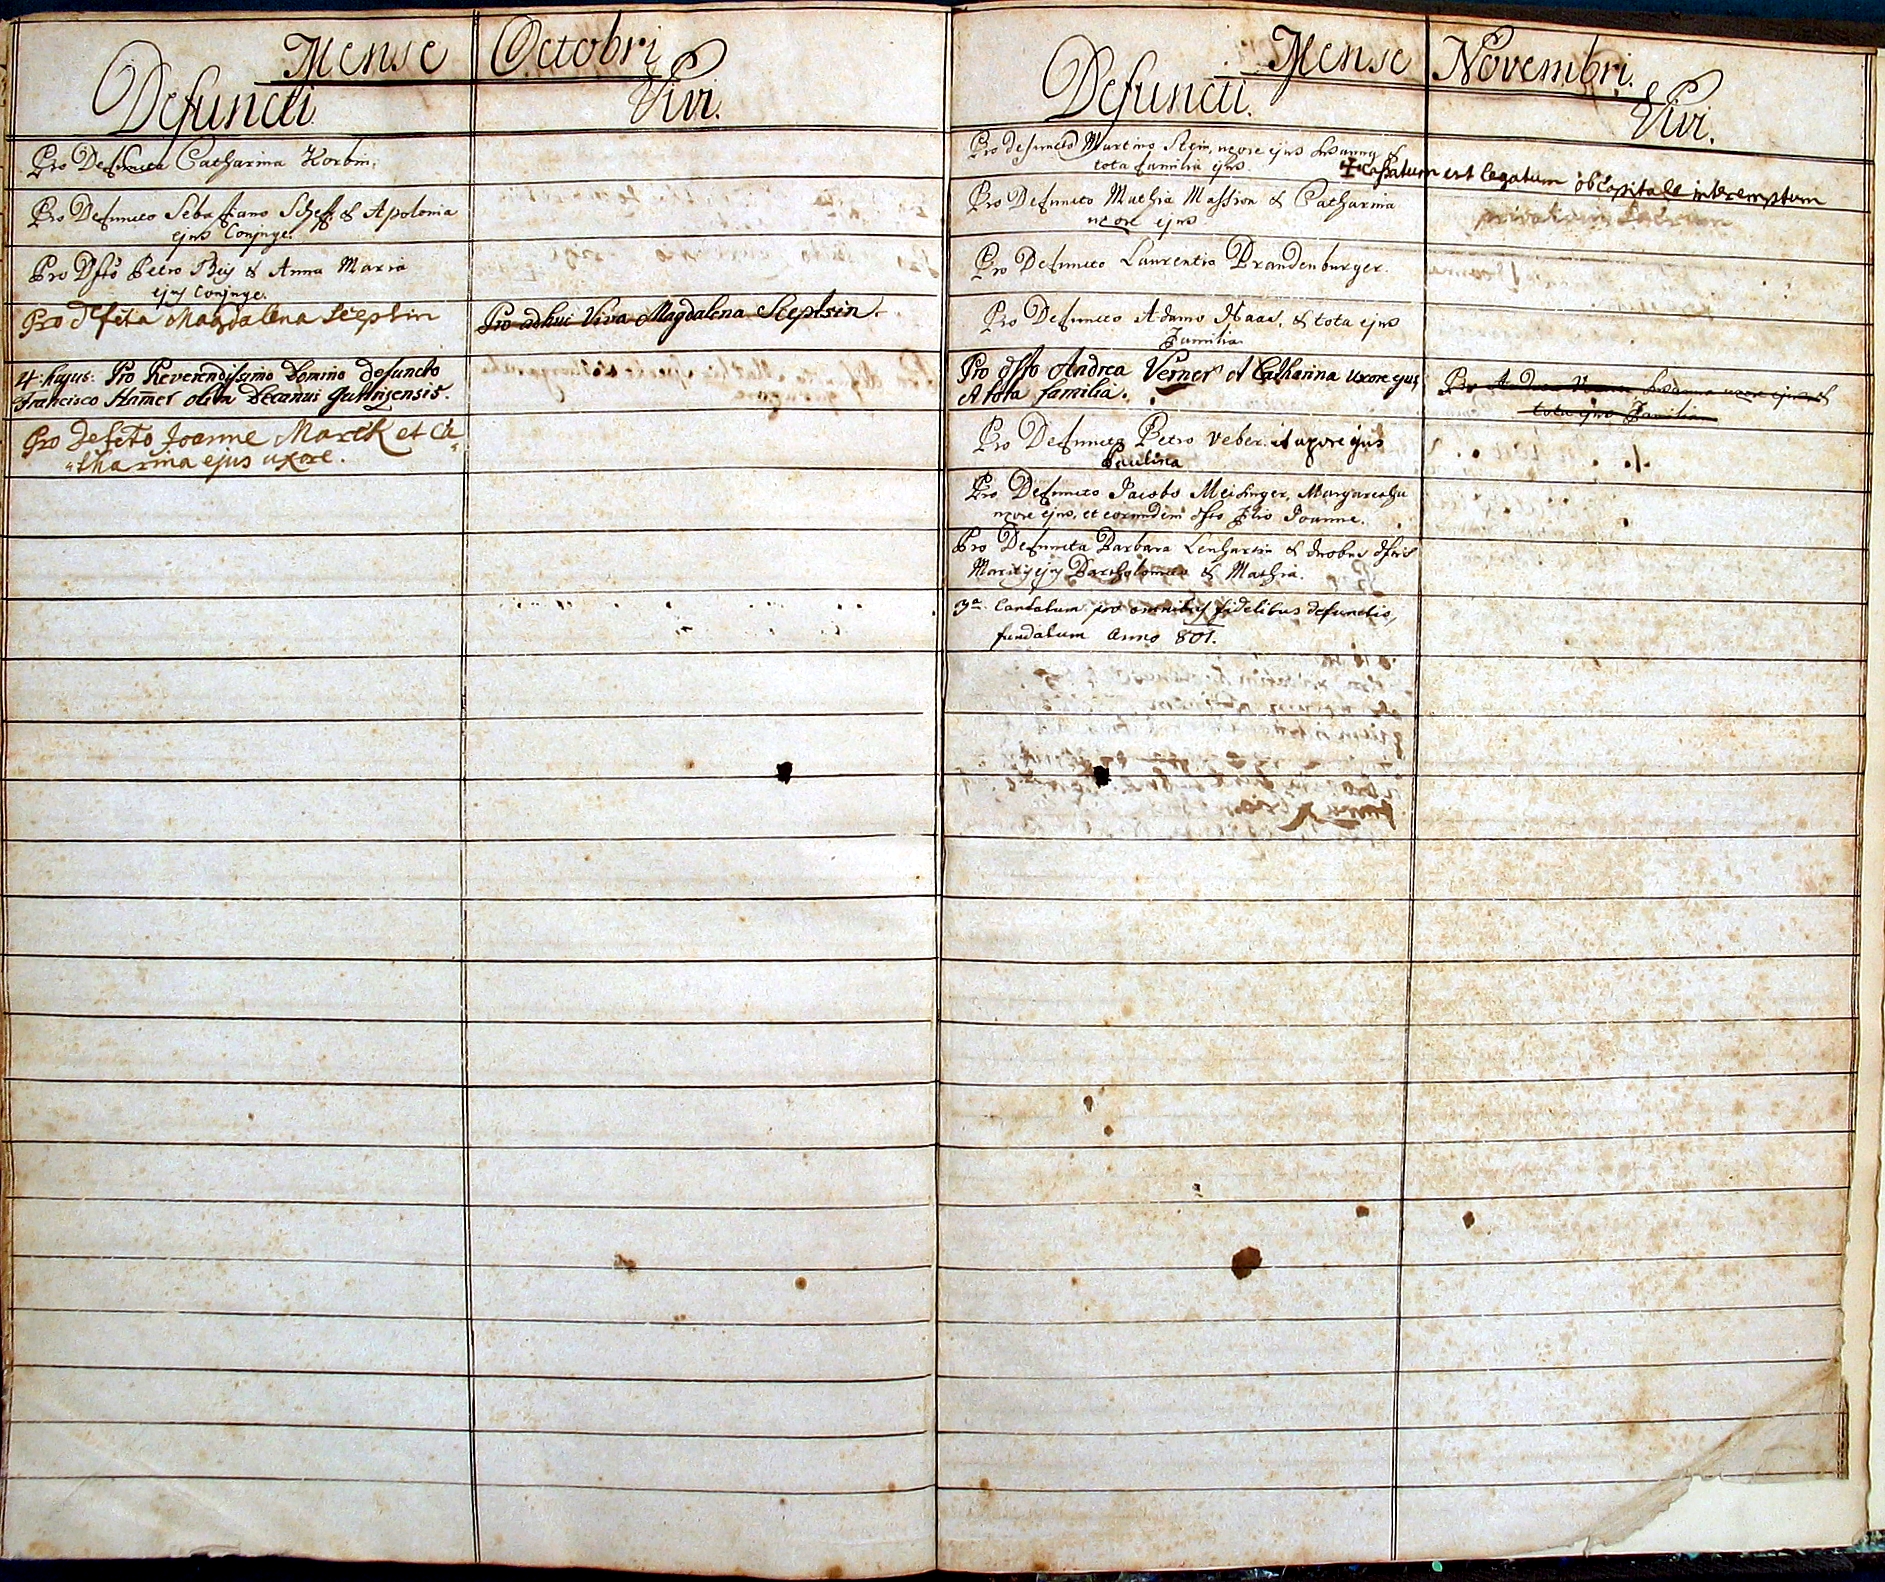 images/church_records/DEATHS/1775-1828D/183 i 184